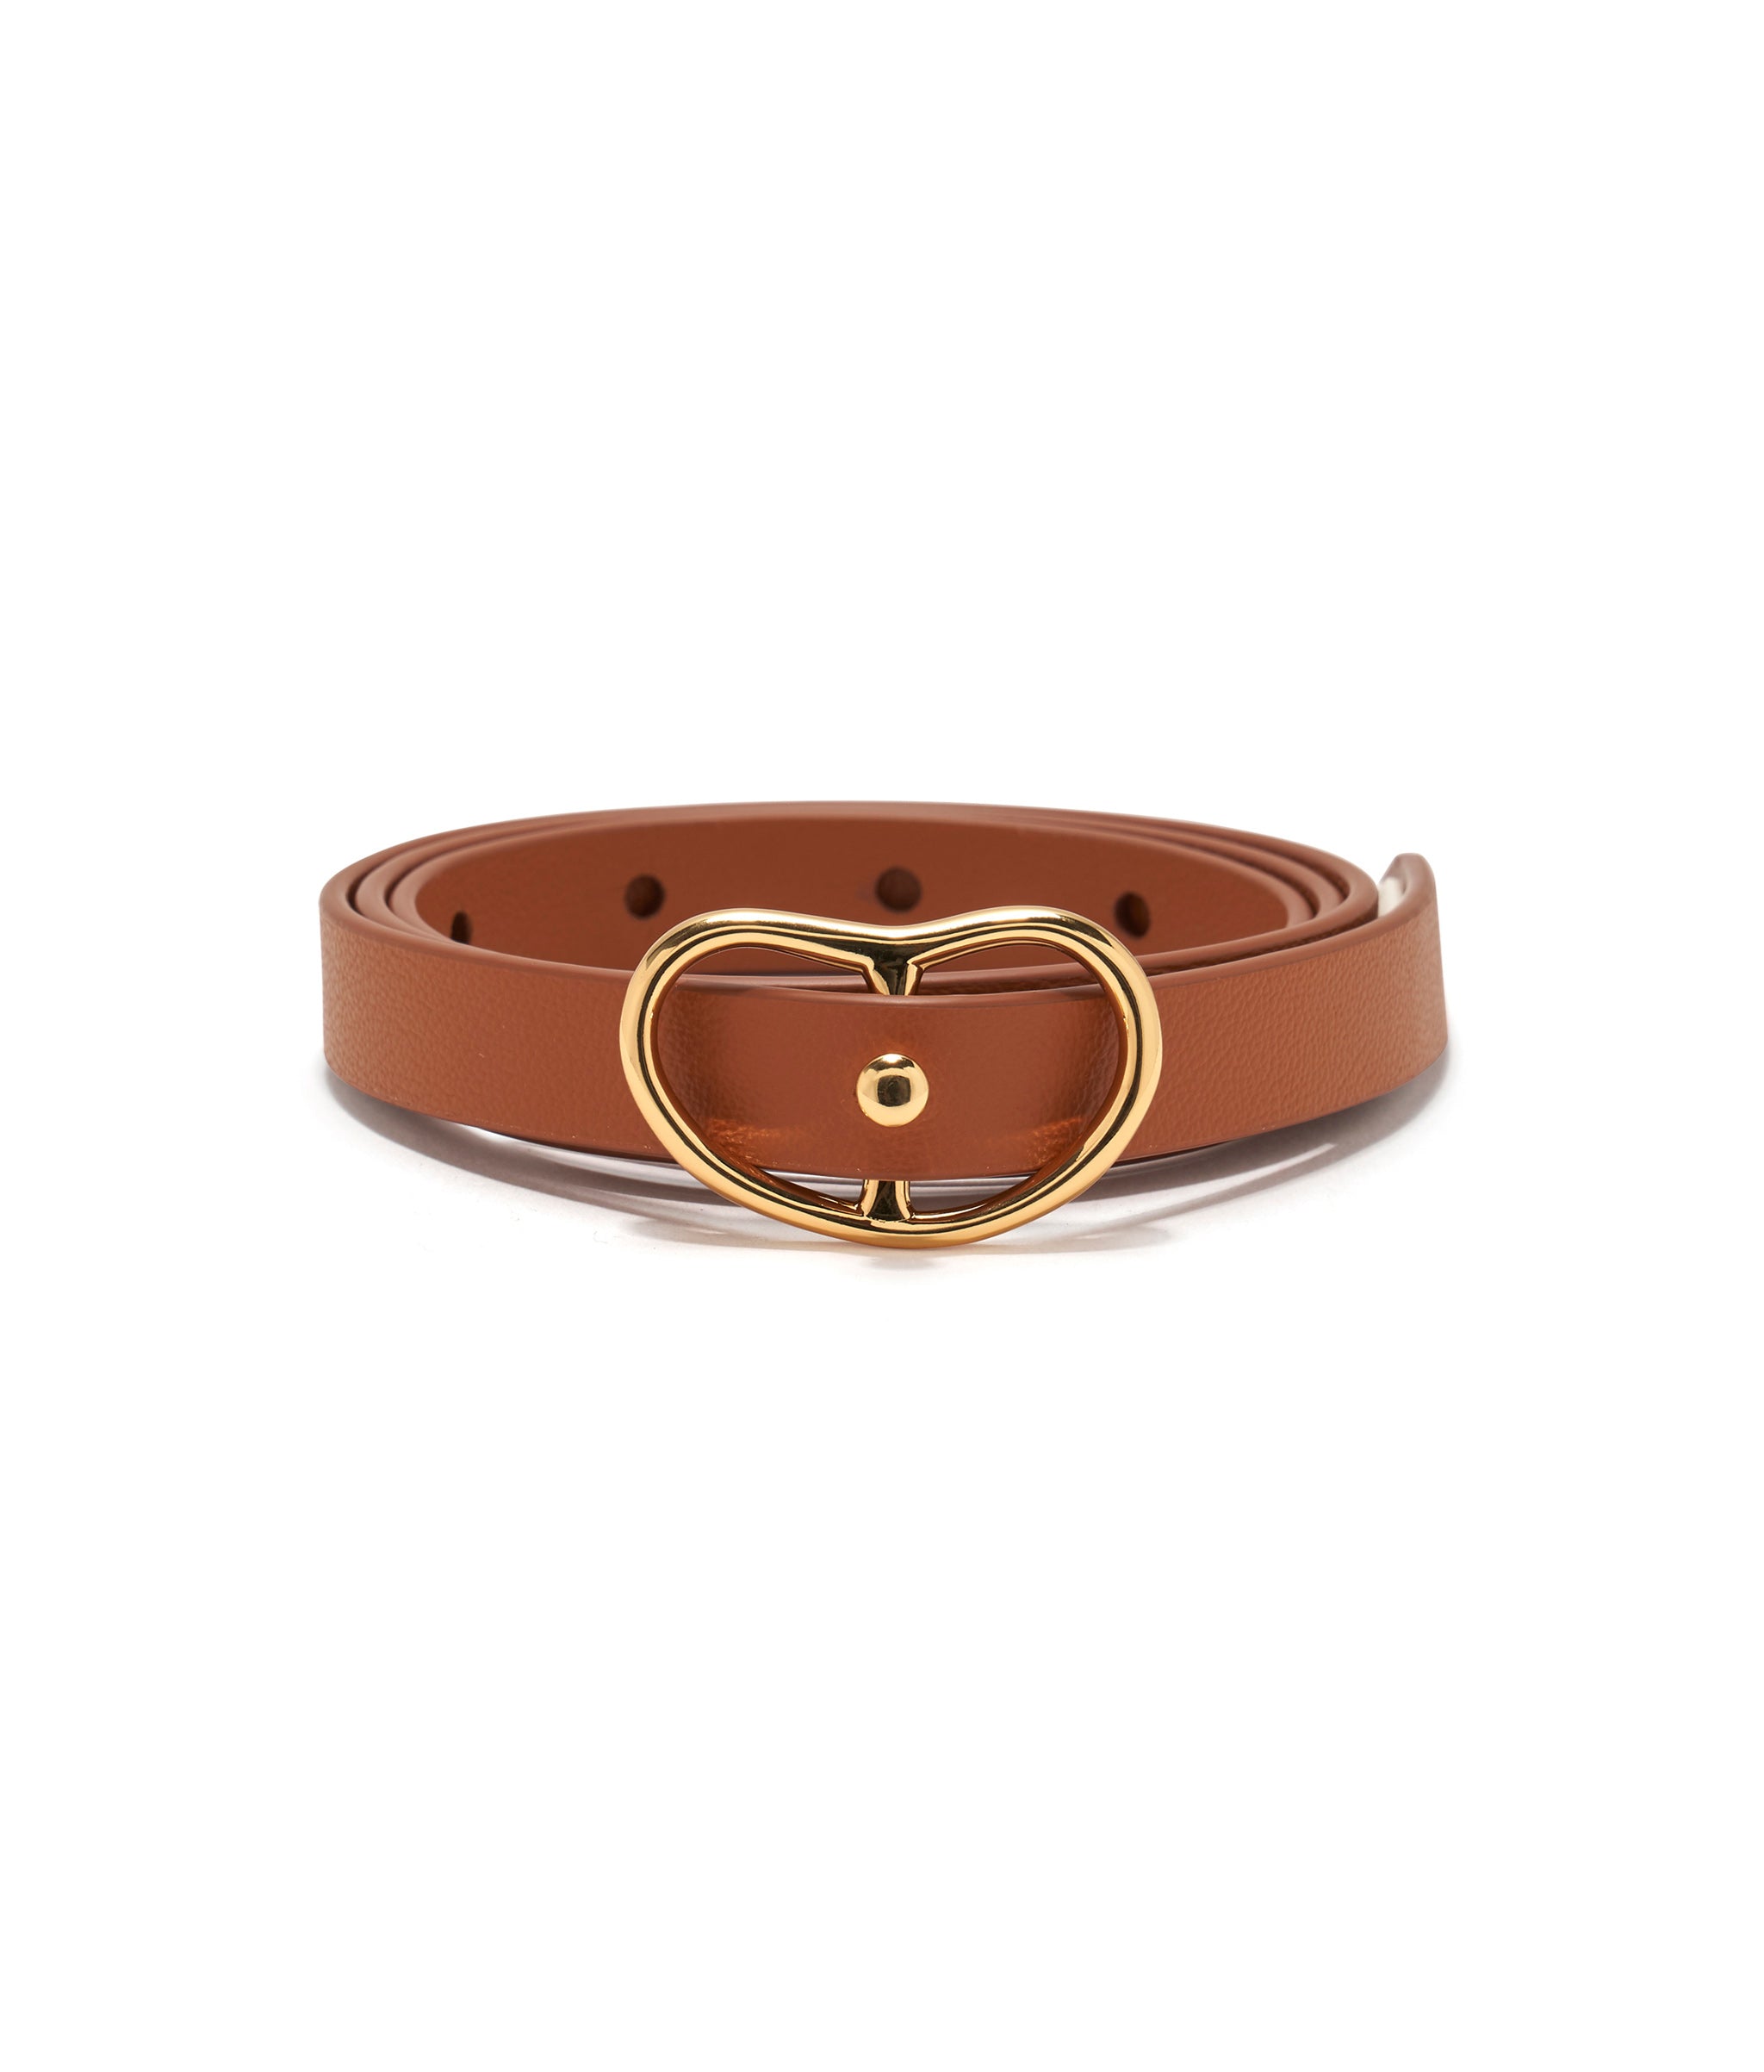 Skinny Georgia Belt In Tan. Thin tan leather belt with gold-plated brass kidney-shaped buckle.